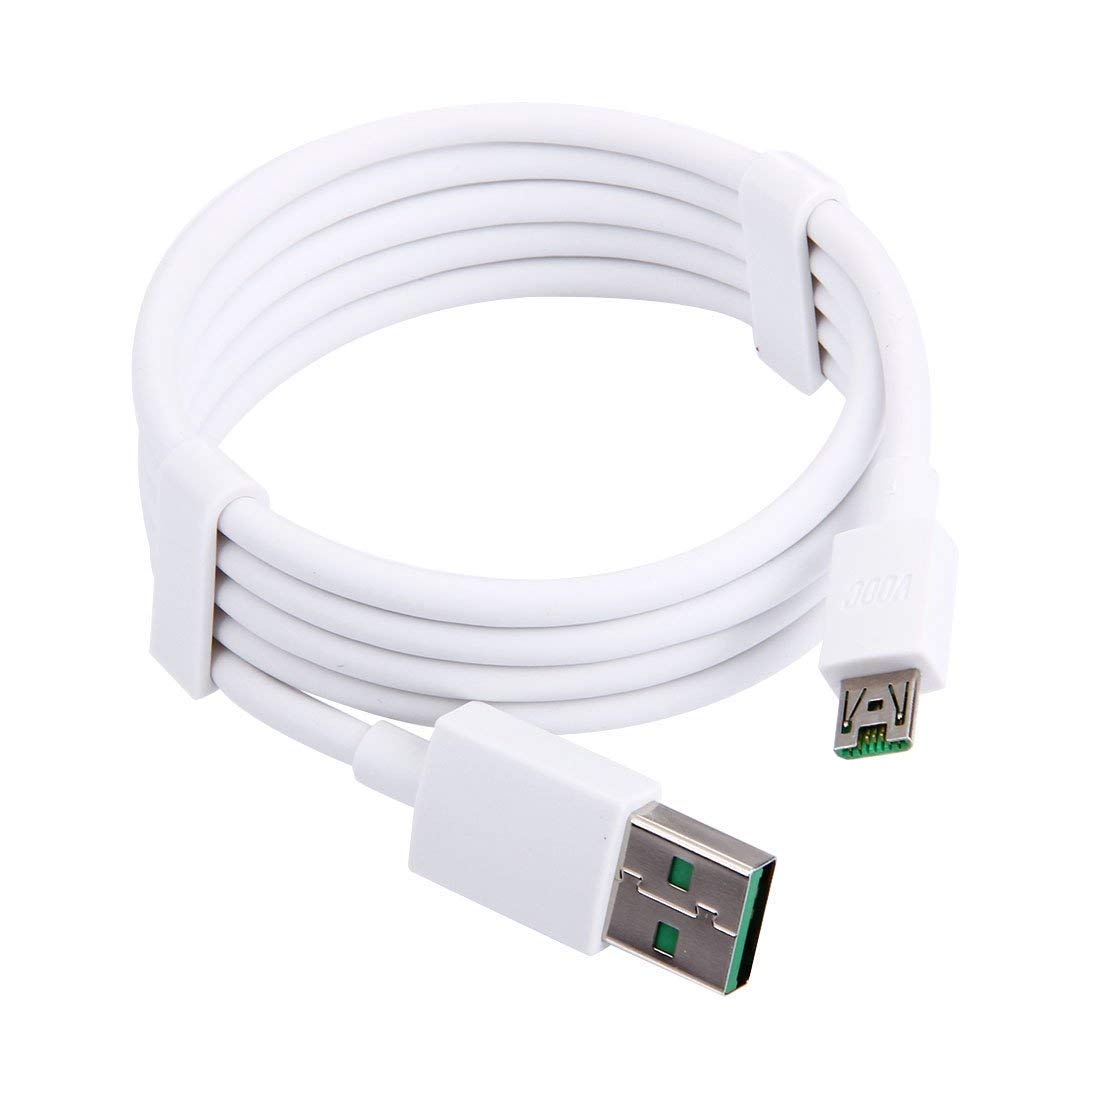 Oppo F11 Vooc Fast Charging Micro Data Cable White-1 Meter